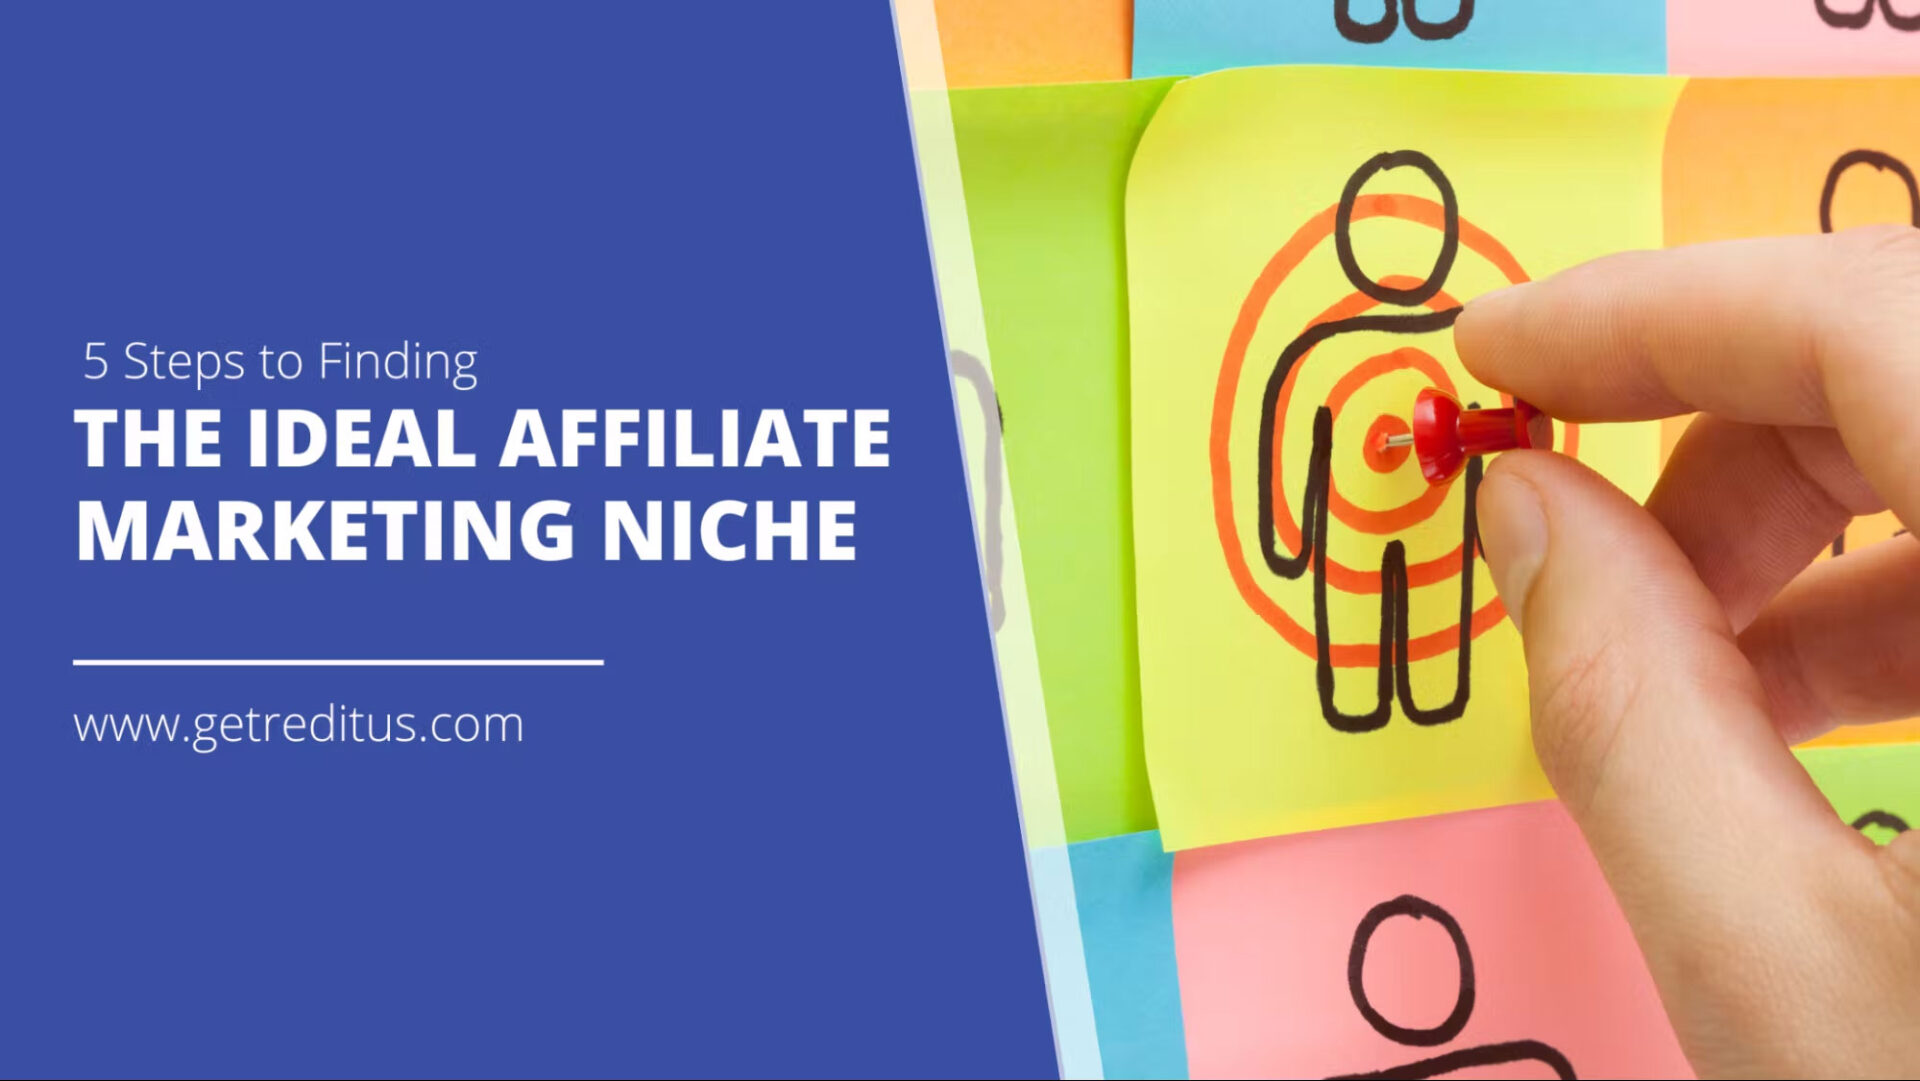 How To Find a Profitable Niche for Your Affiliate Marketing Business